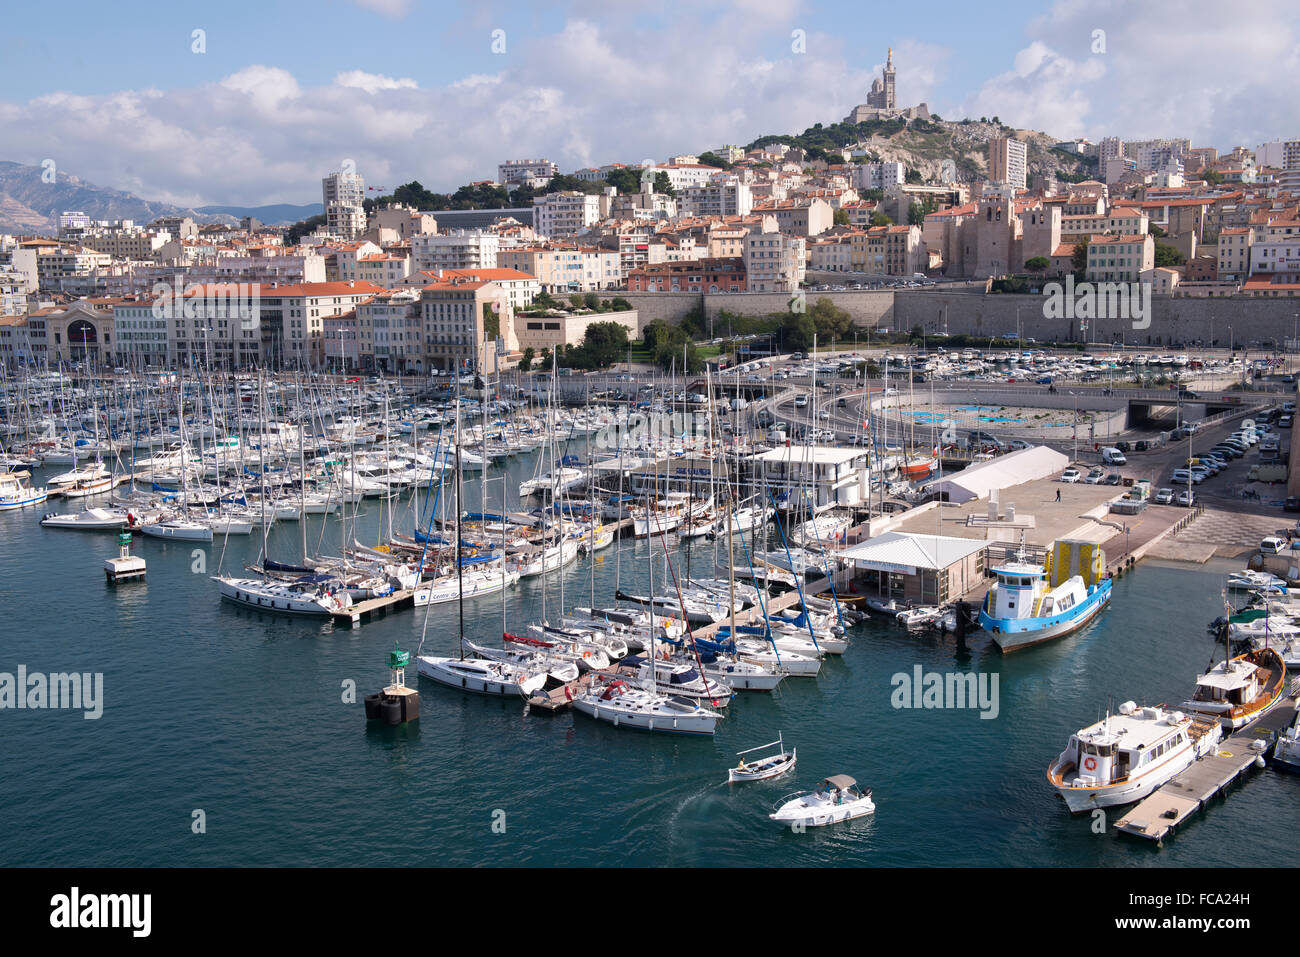 View from the Fort Saint-Jean of the Vieux-Port, or Old Port, in Marseille, France. Stock Photo